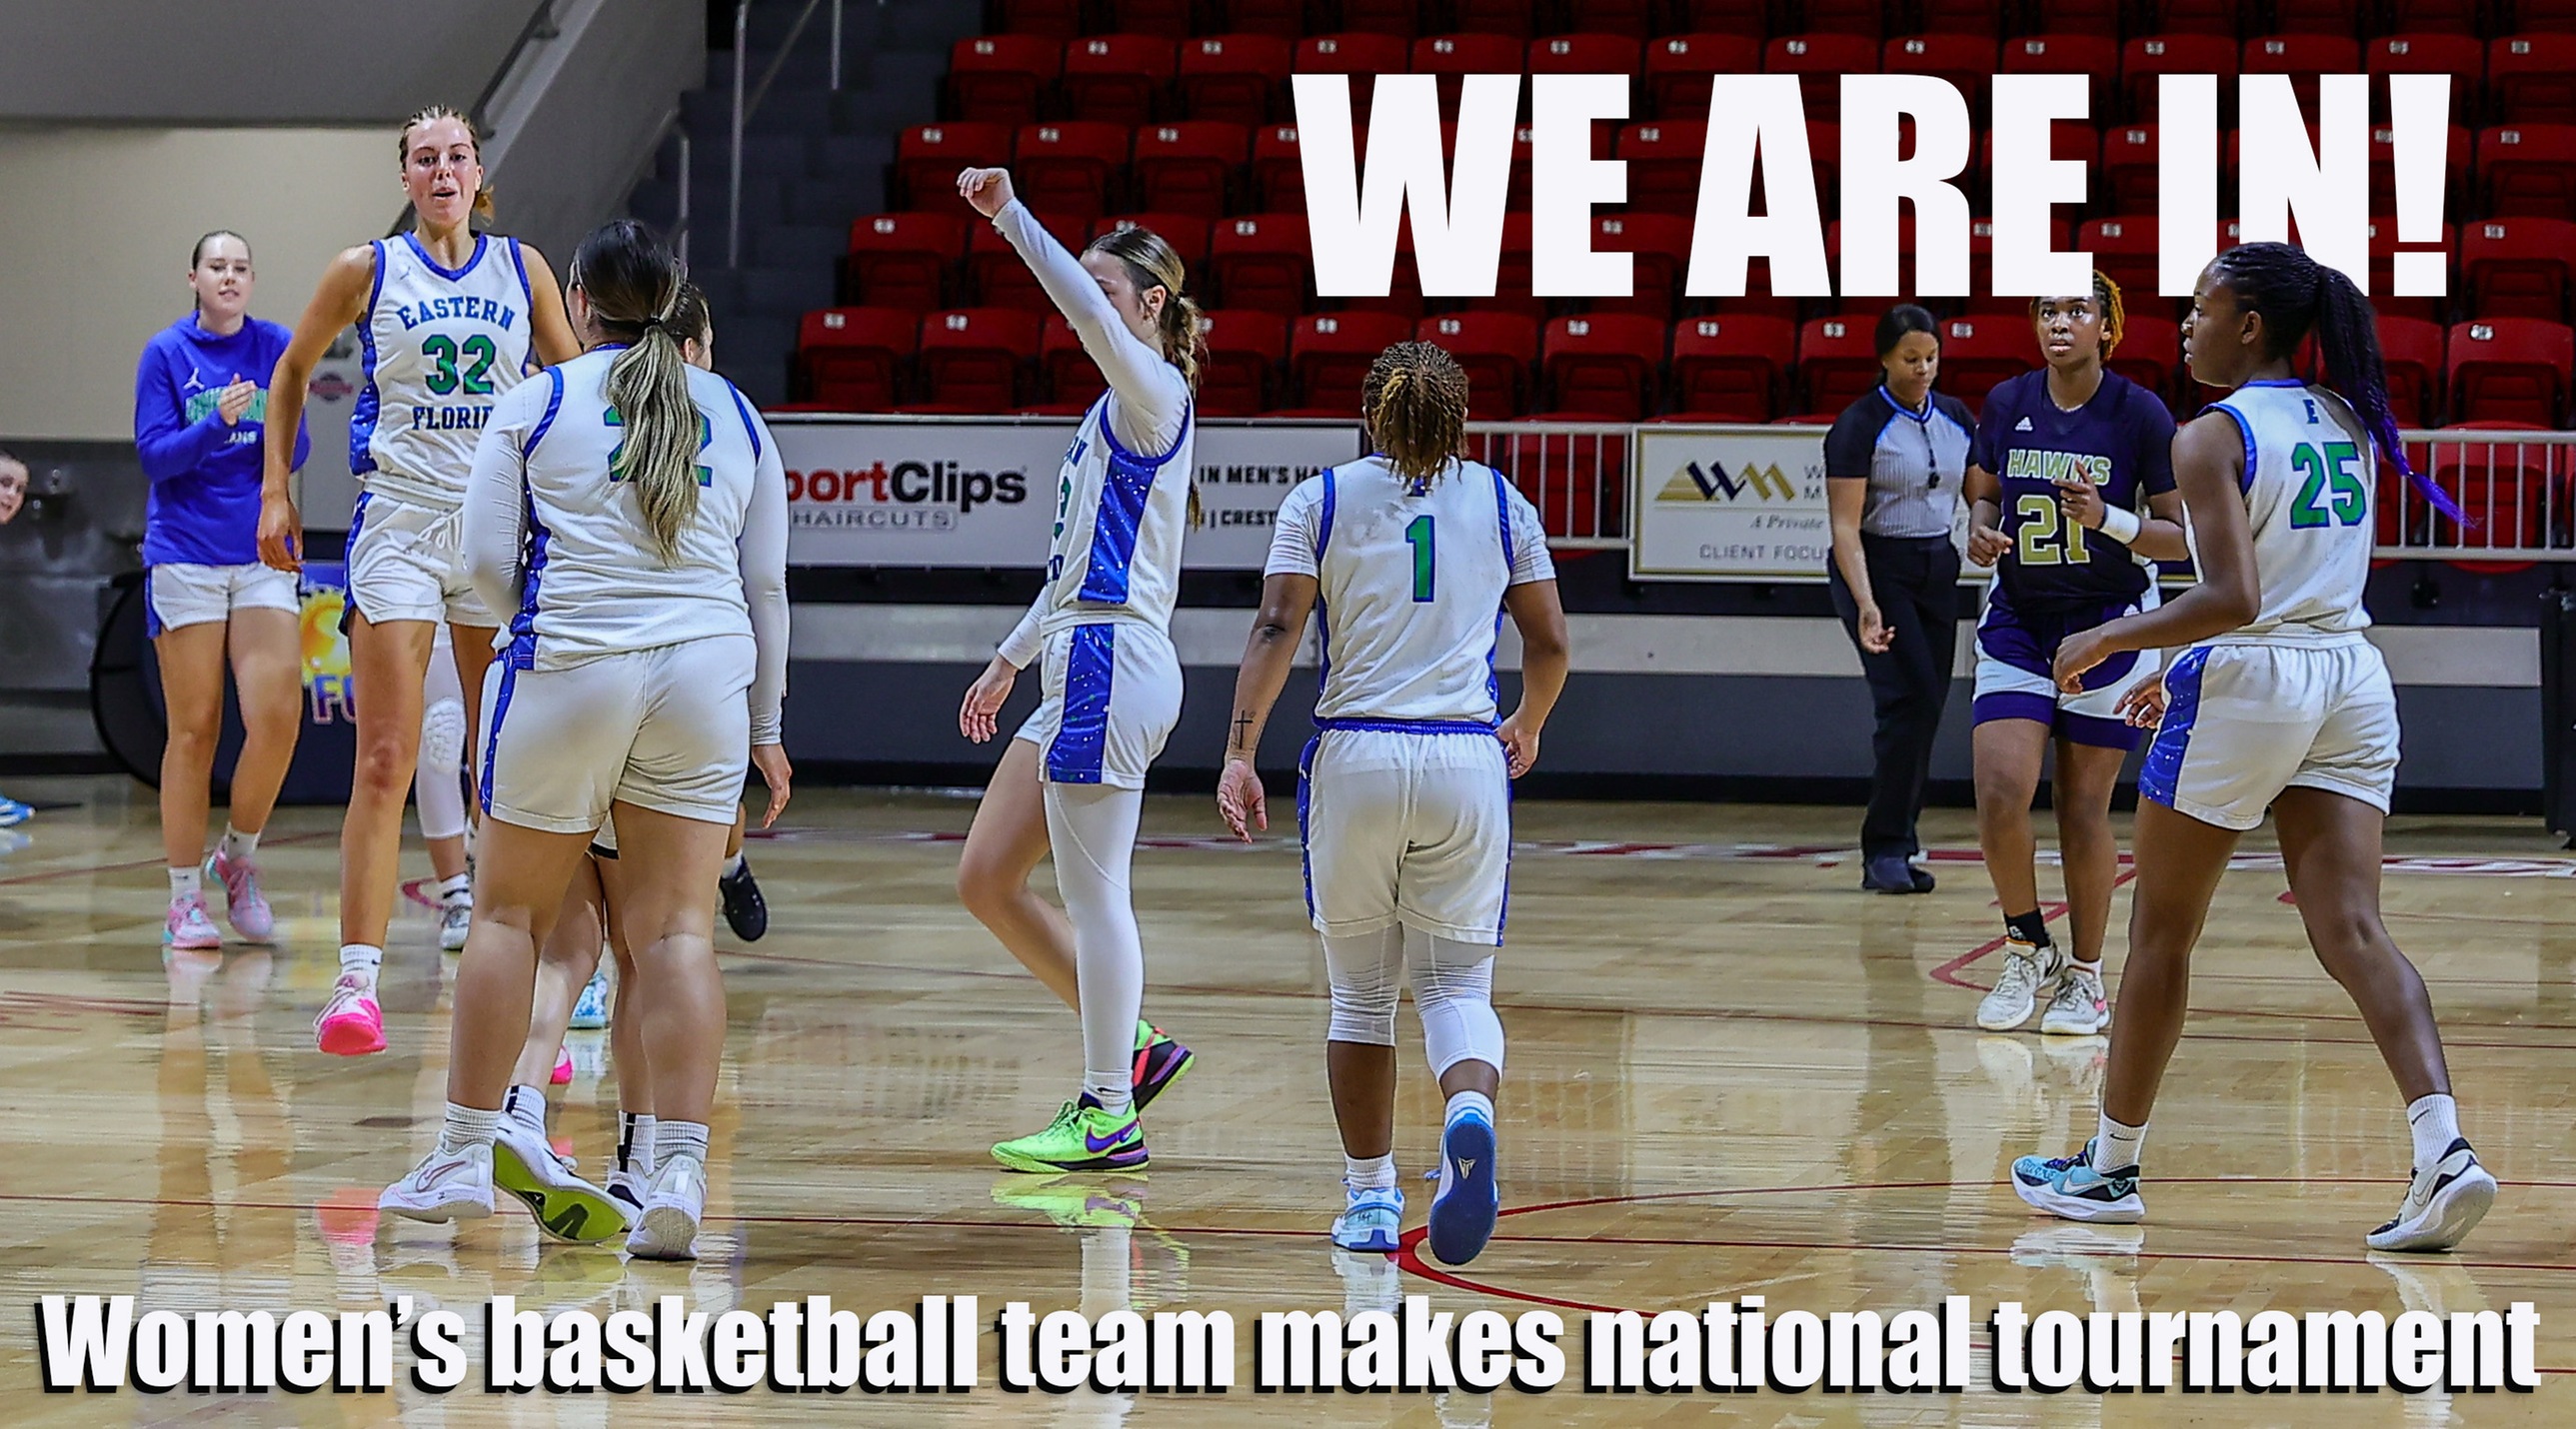 Women's basketball team is back in the national tournament